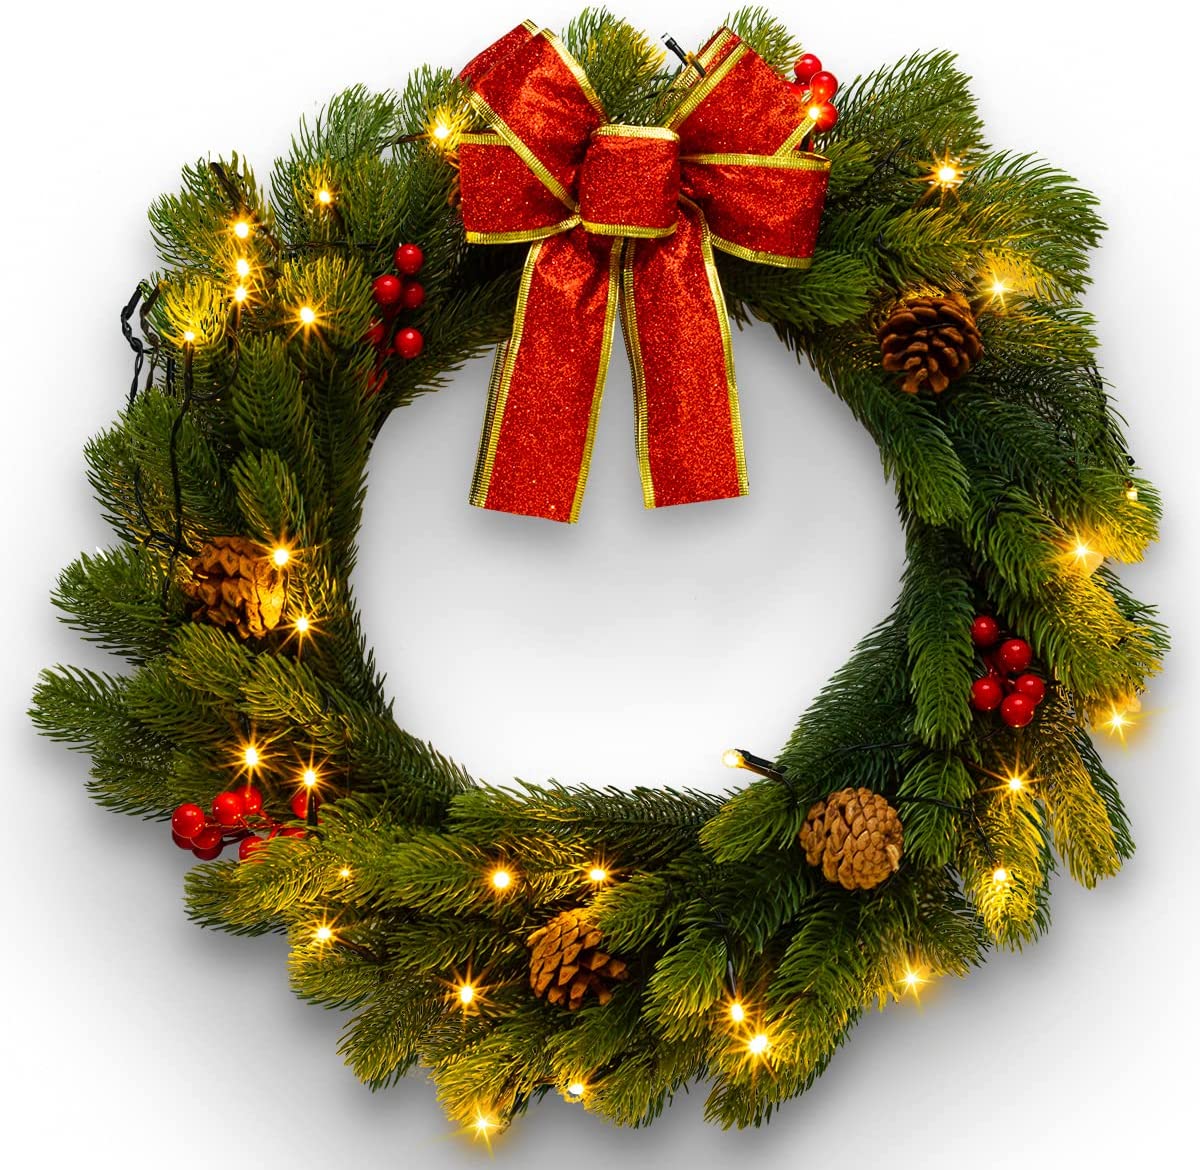 20in Christmas Wreath with Bow